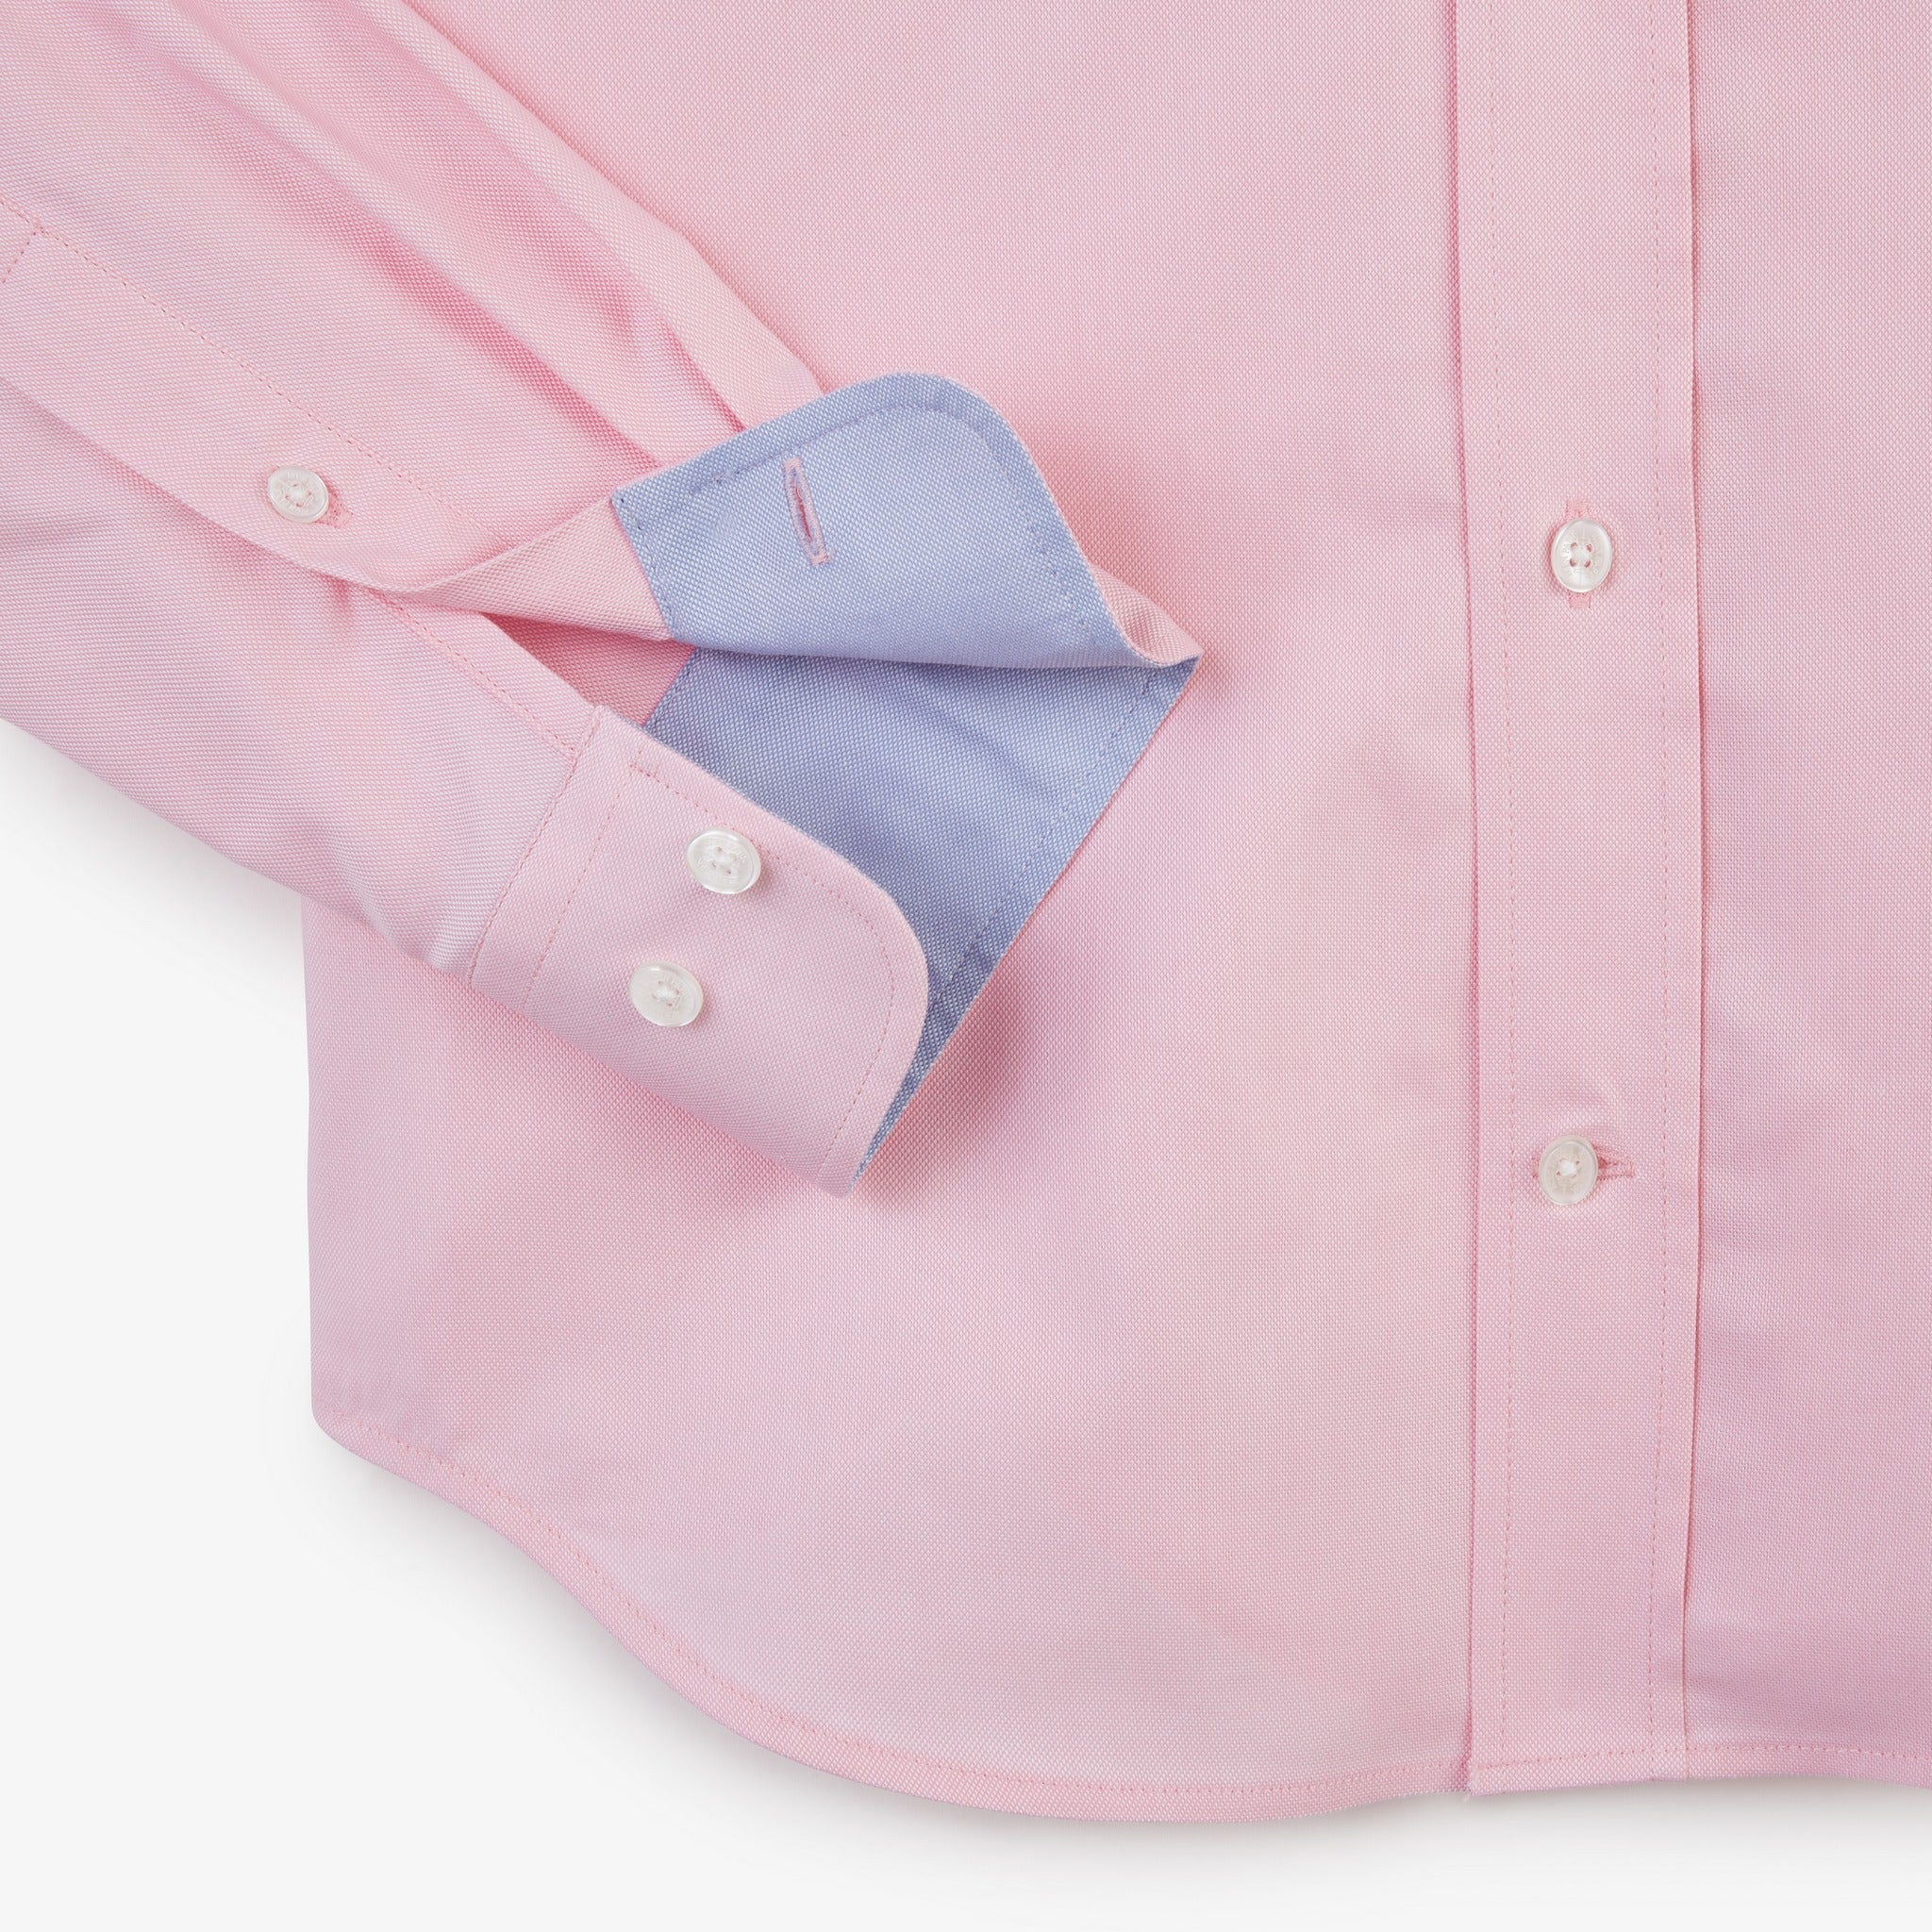 pink-cotton-shirt_ppshiche0020_rom_09